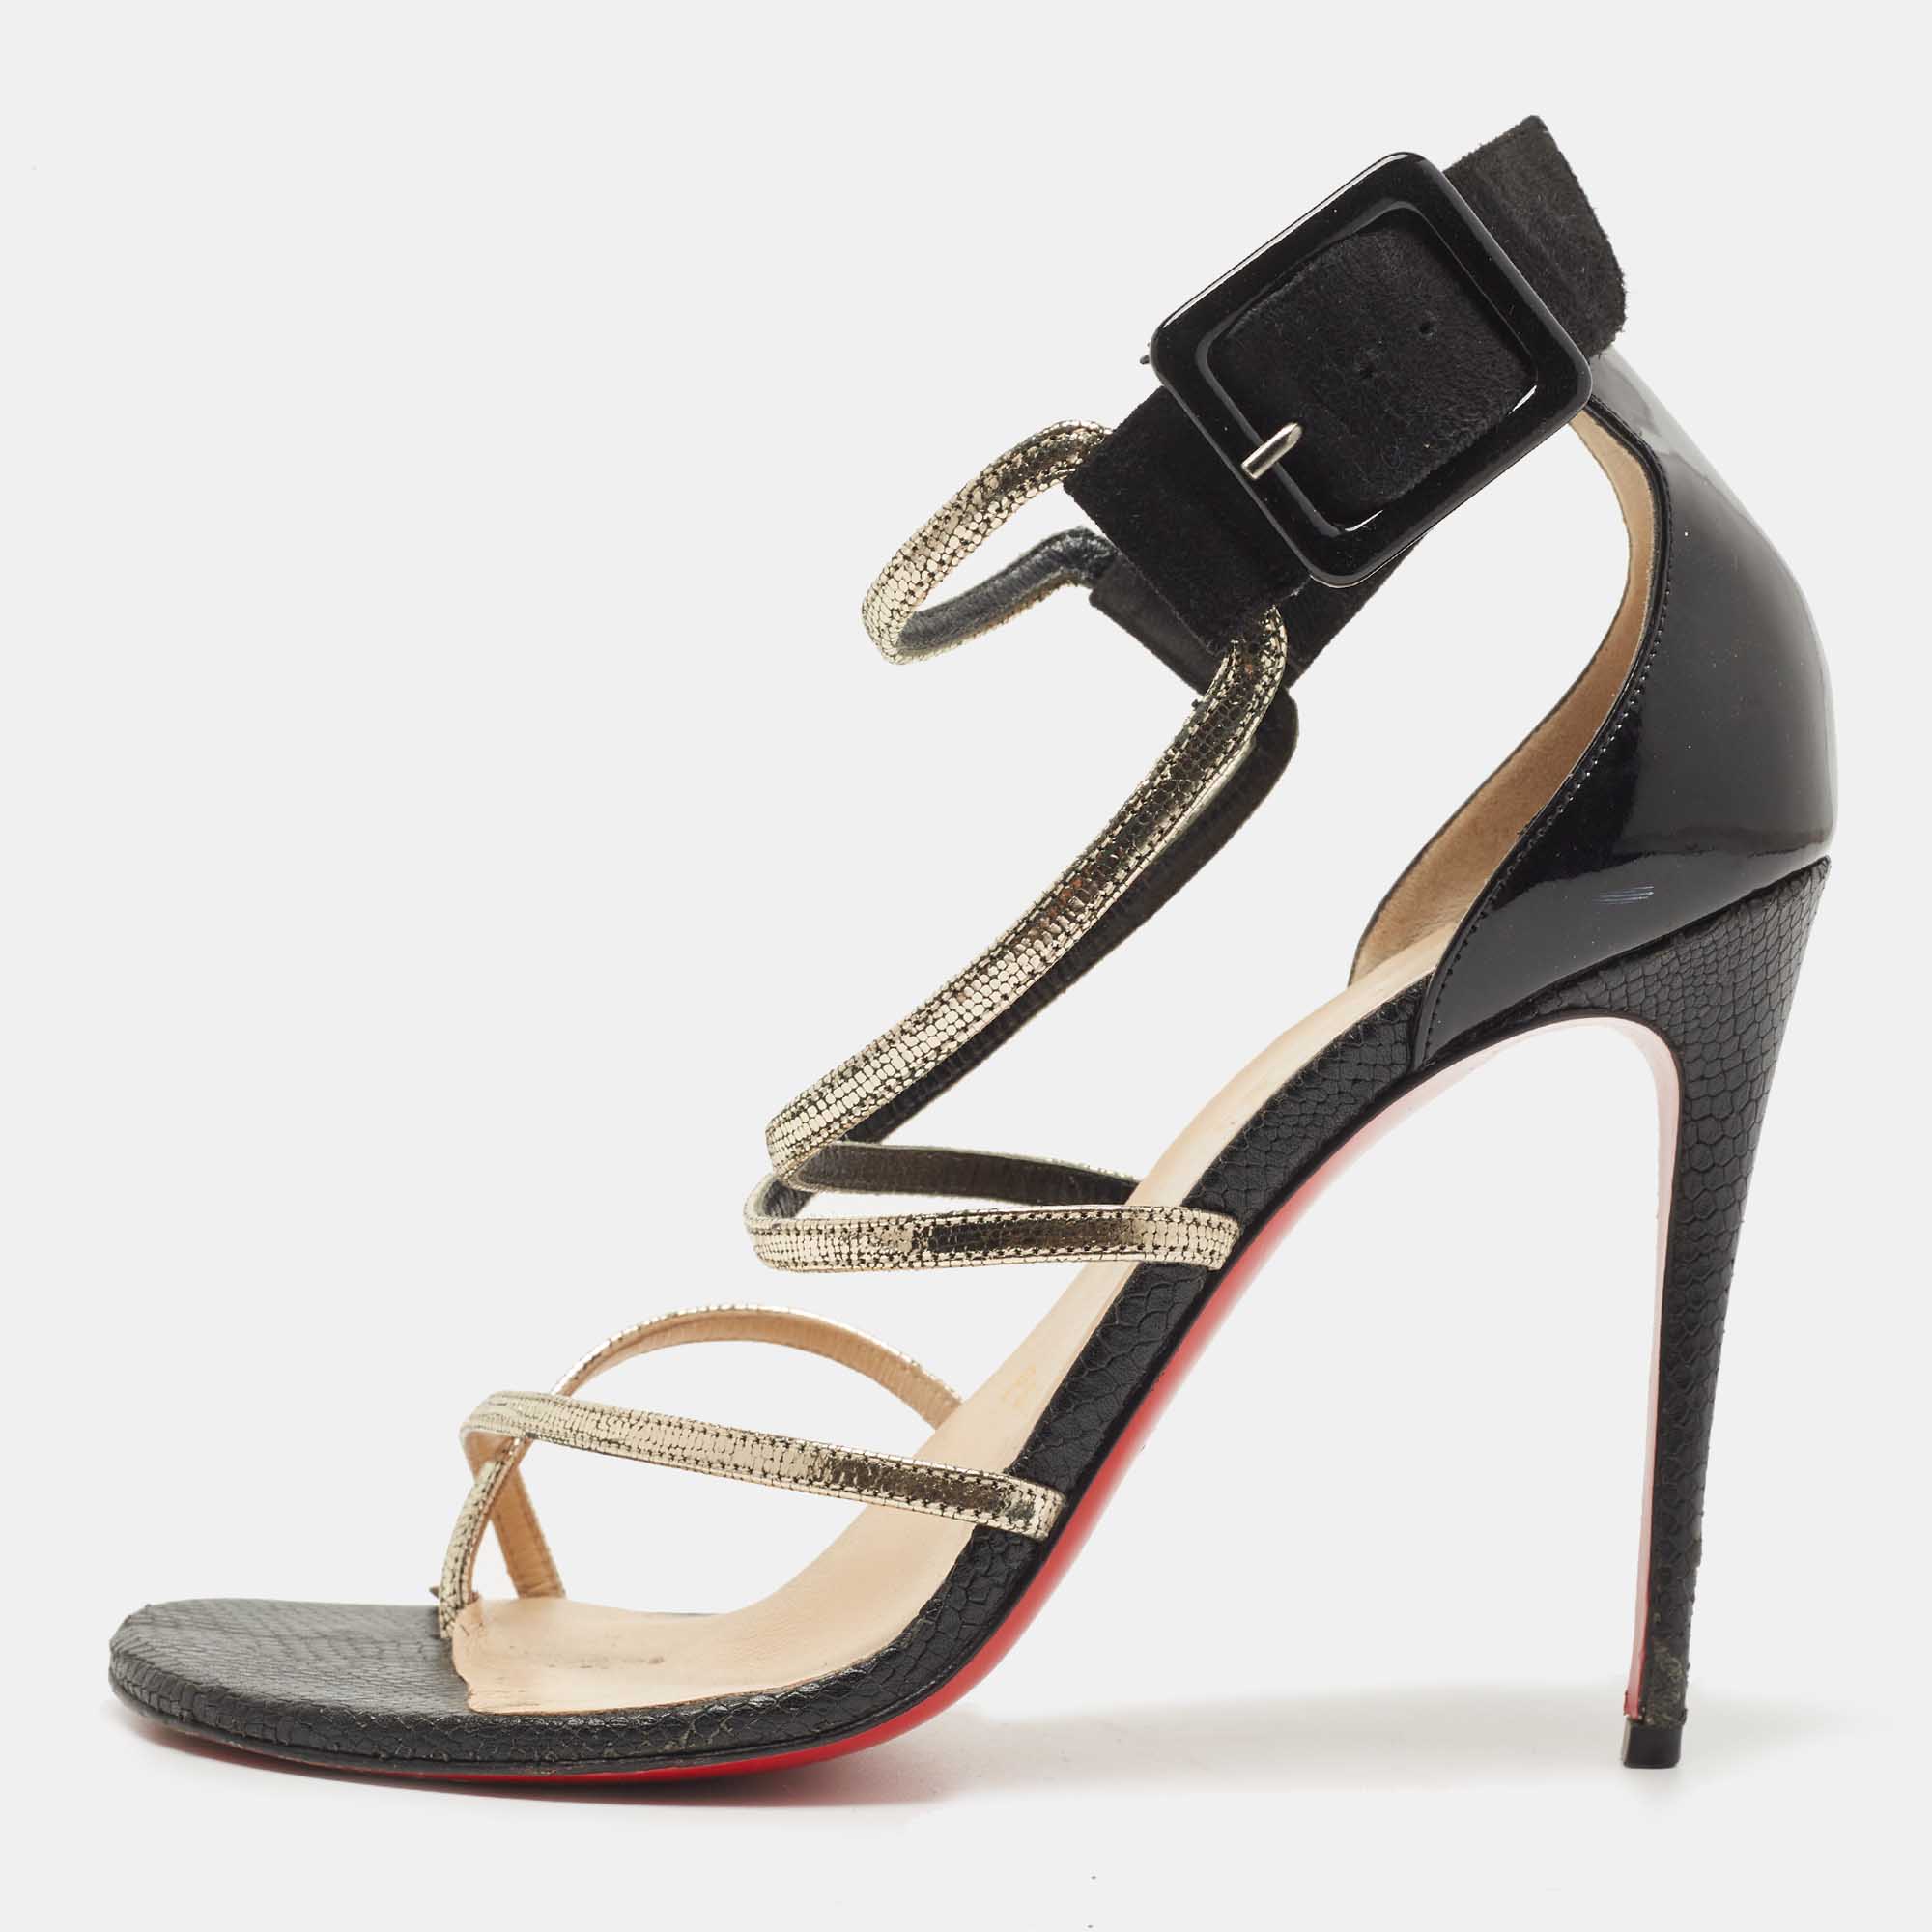 Christian louboutin black/gold leather and suede ankle strap sandals size 38